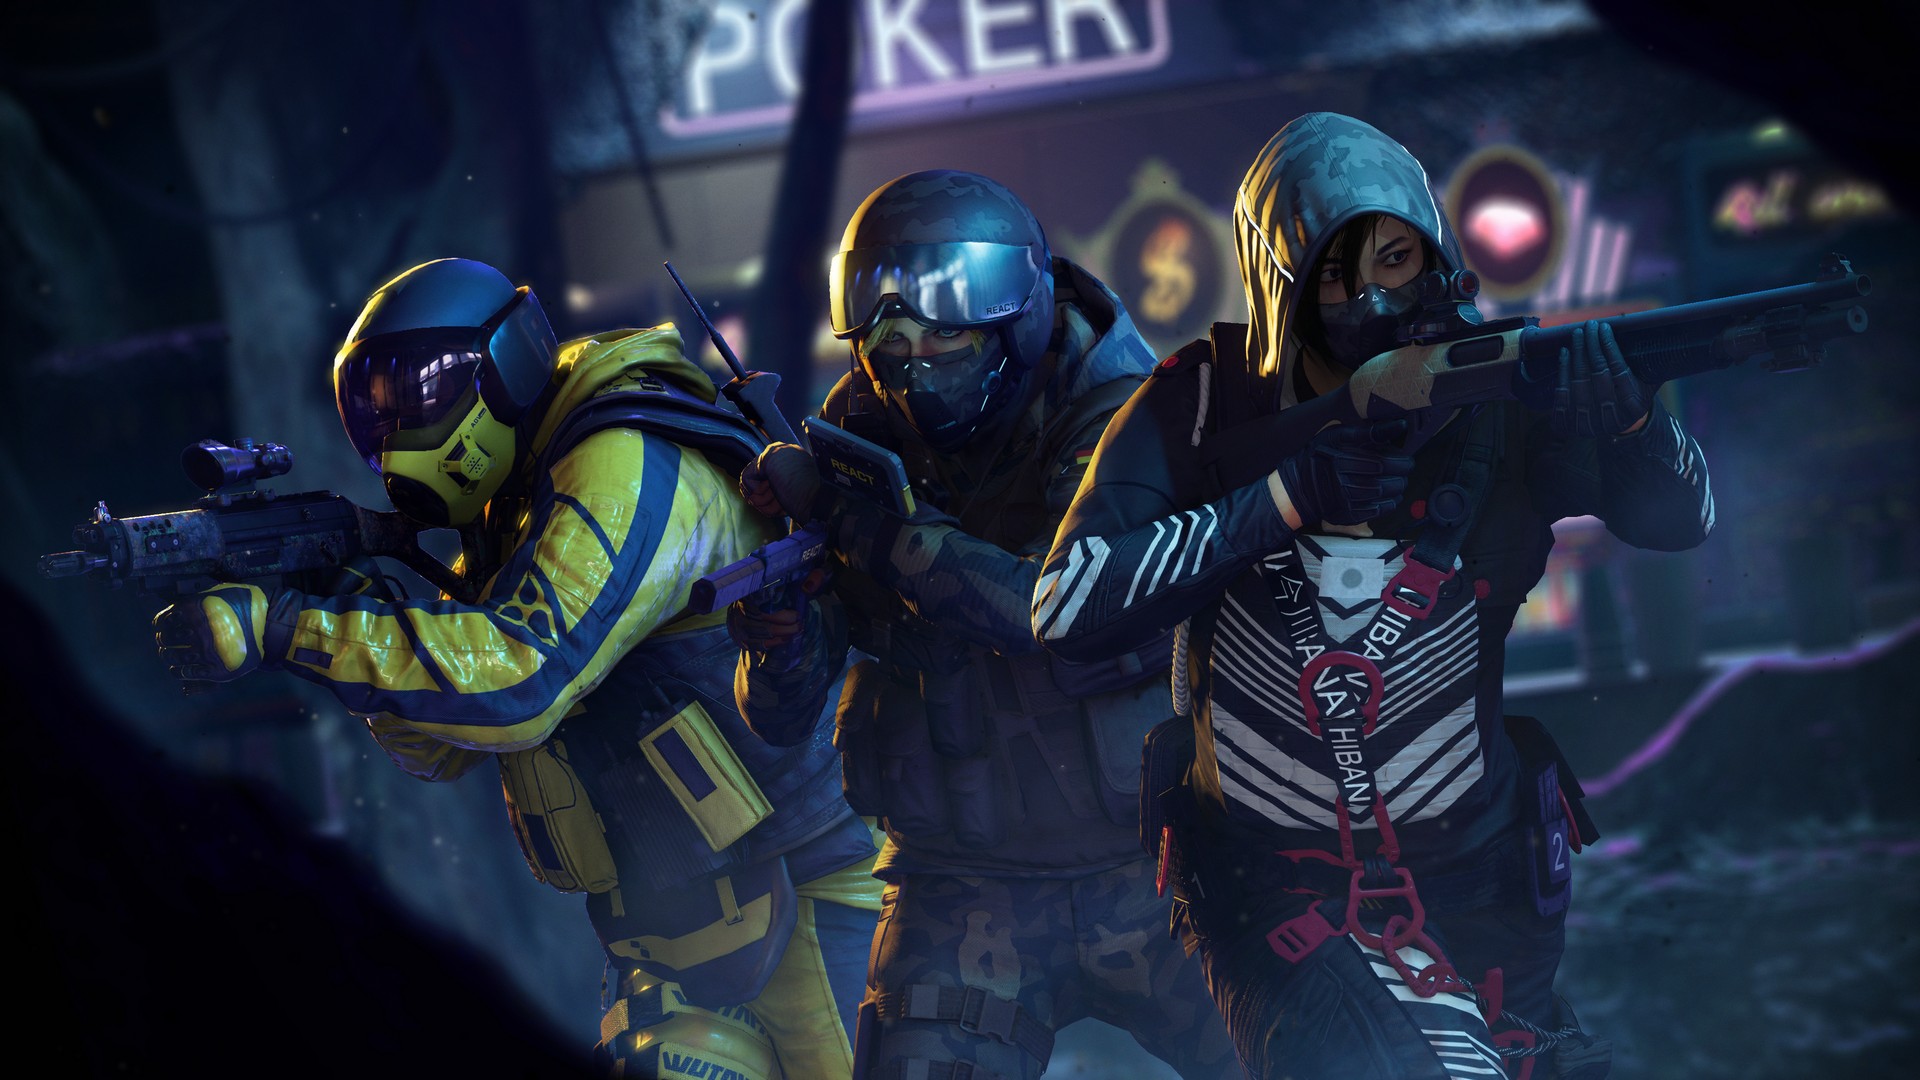 Tom Clancy’s Rainbow Six Extraction Details Revealed: Deep Gameplay Systems, Operator Progression, and More